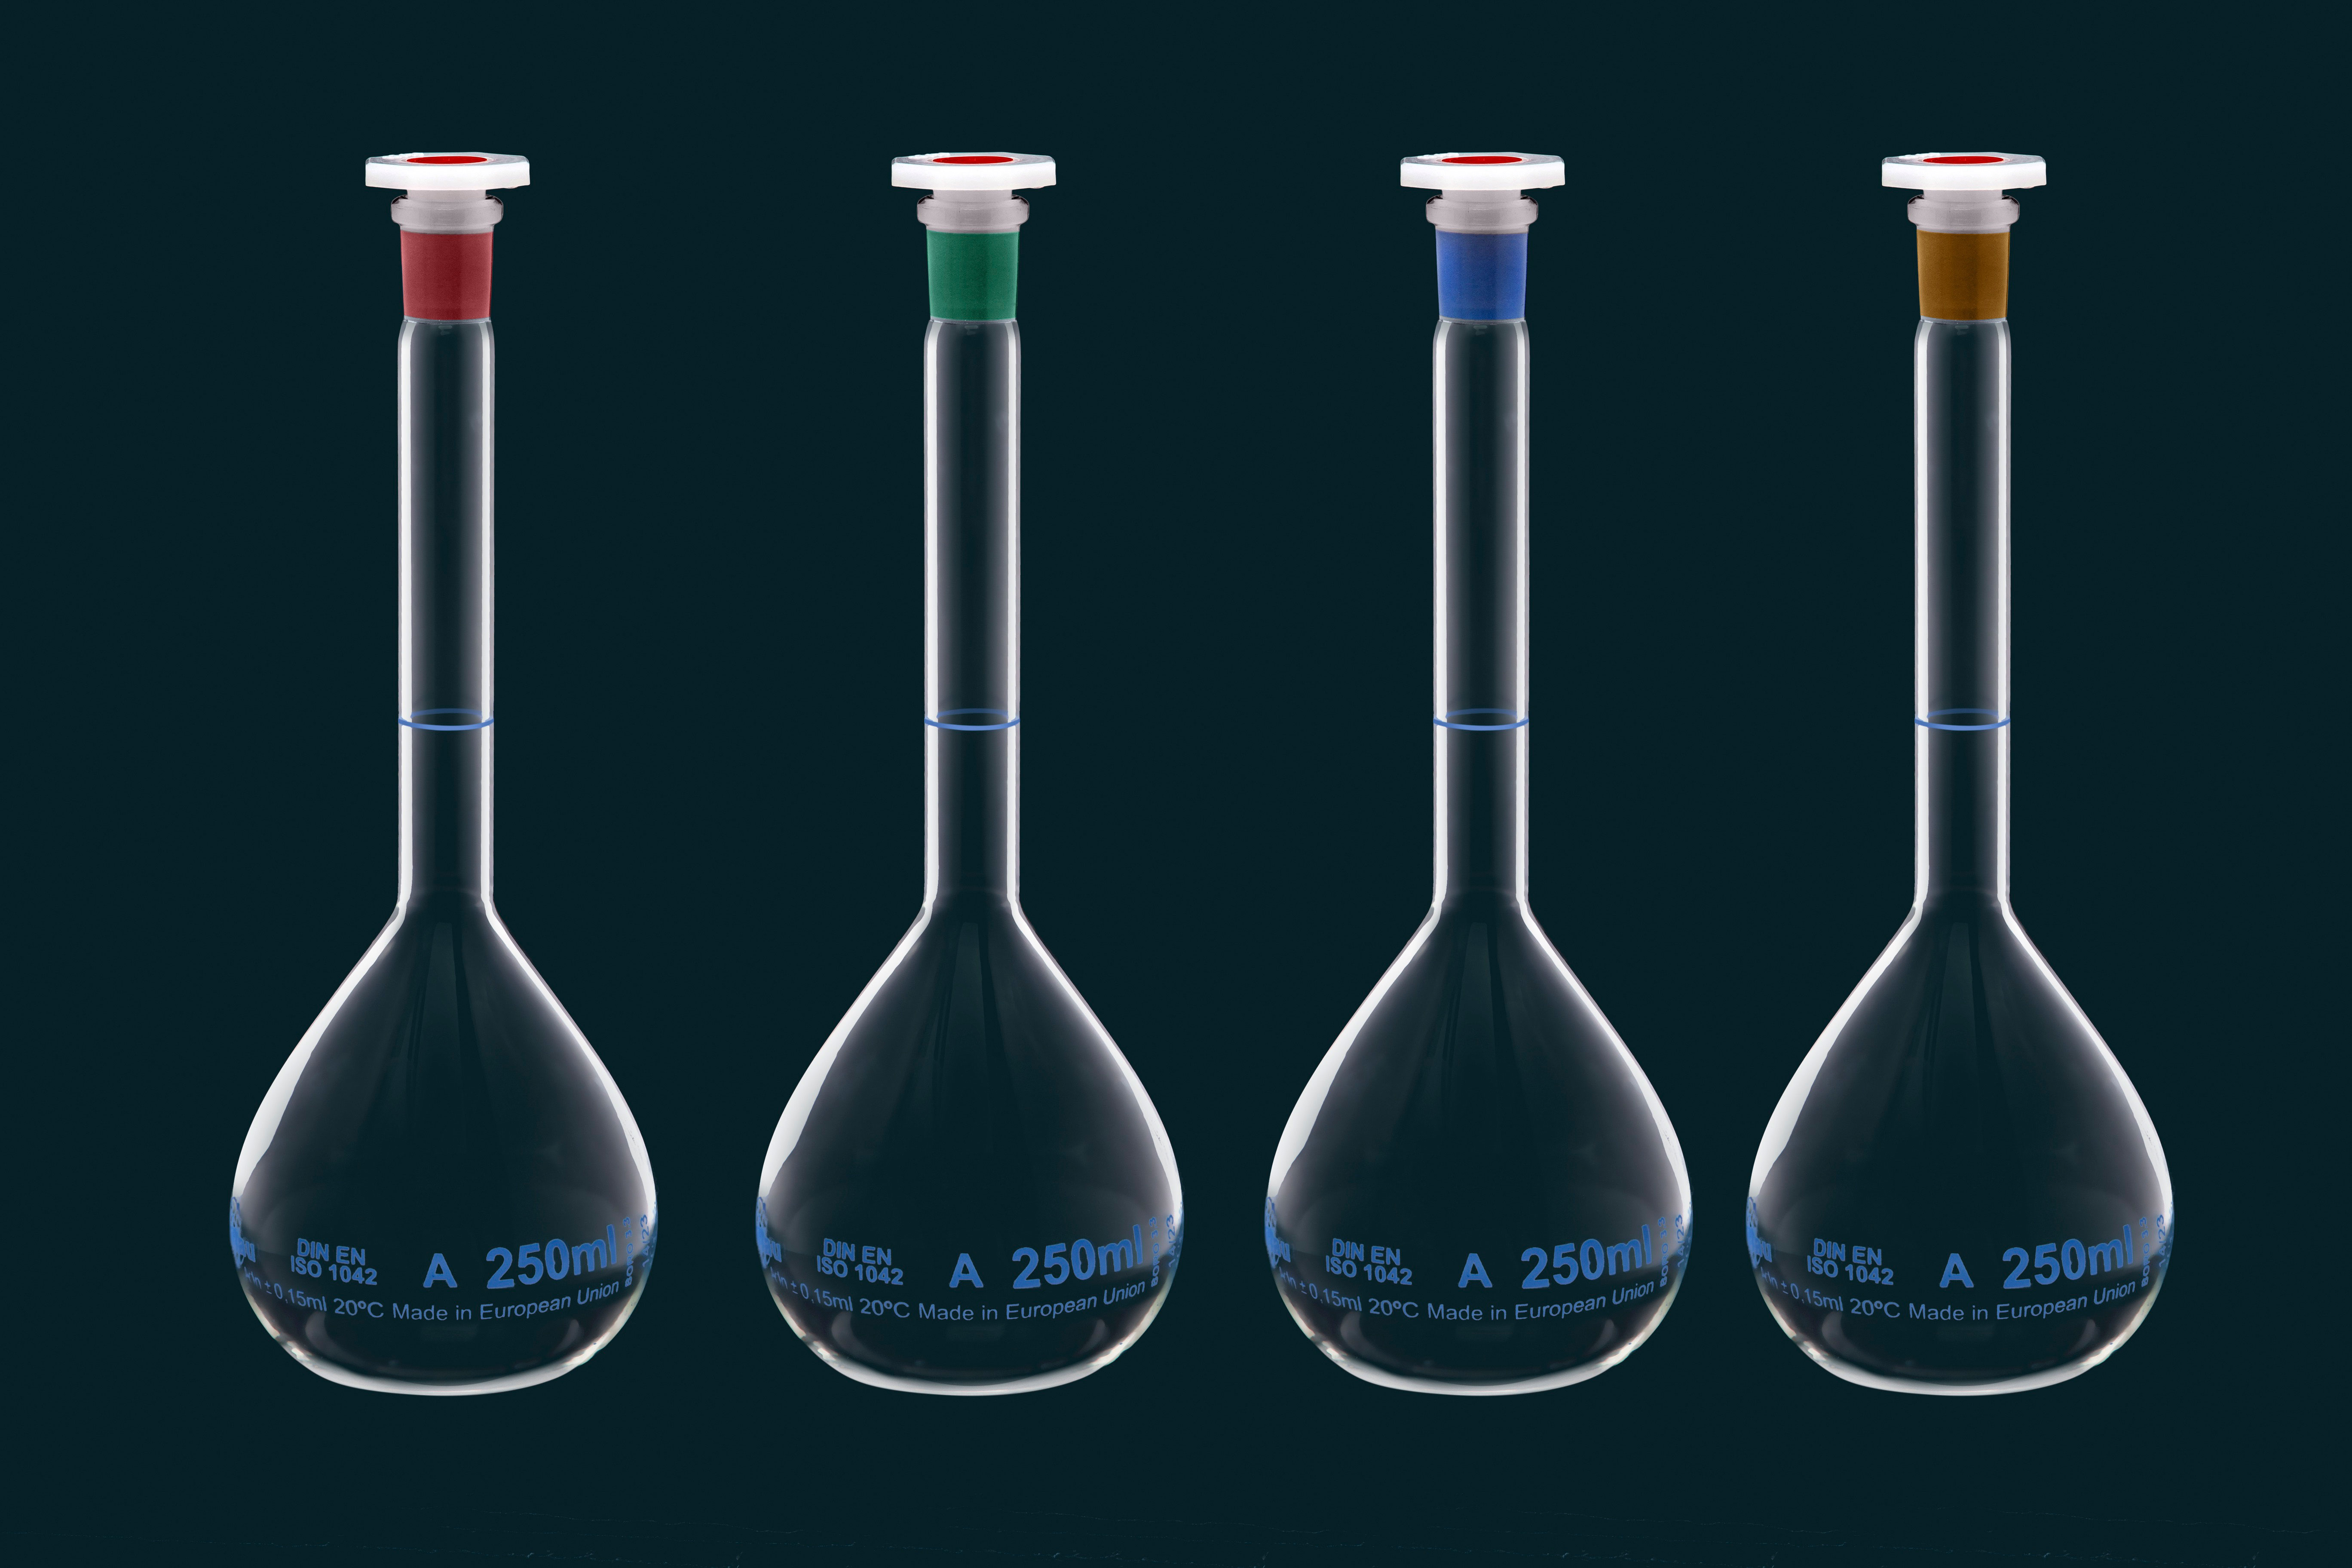 Volumetric flask with green neck, Class A, with PE stopper, lot number and certificate of conformity